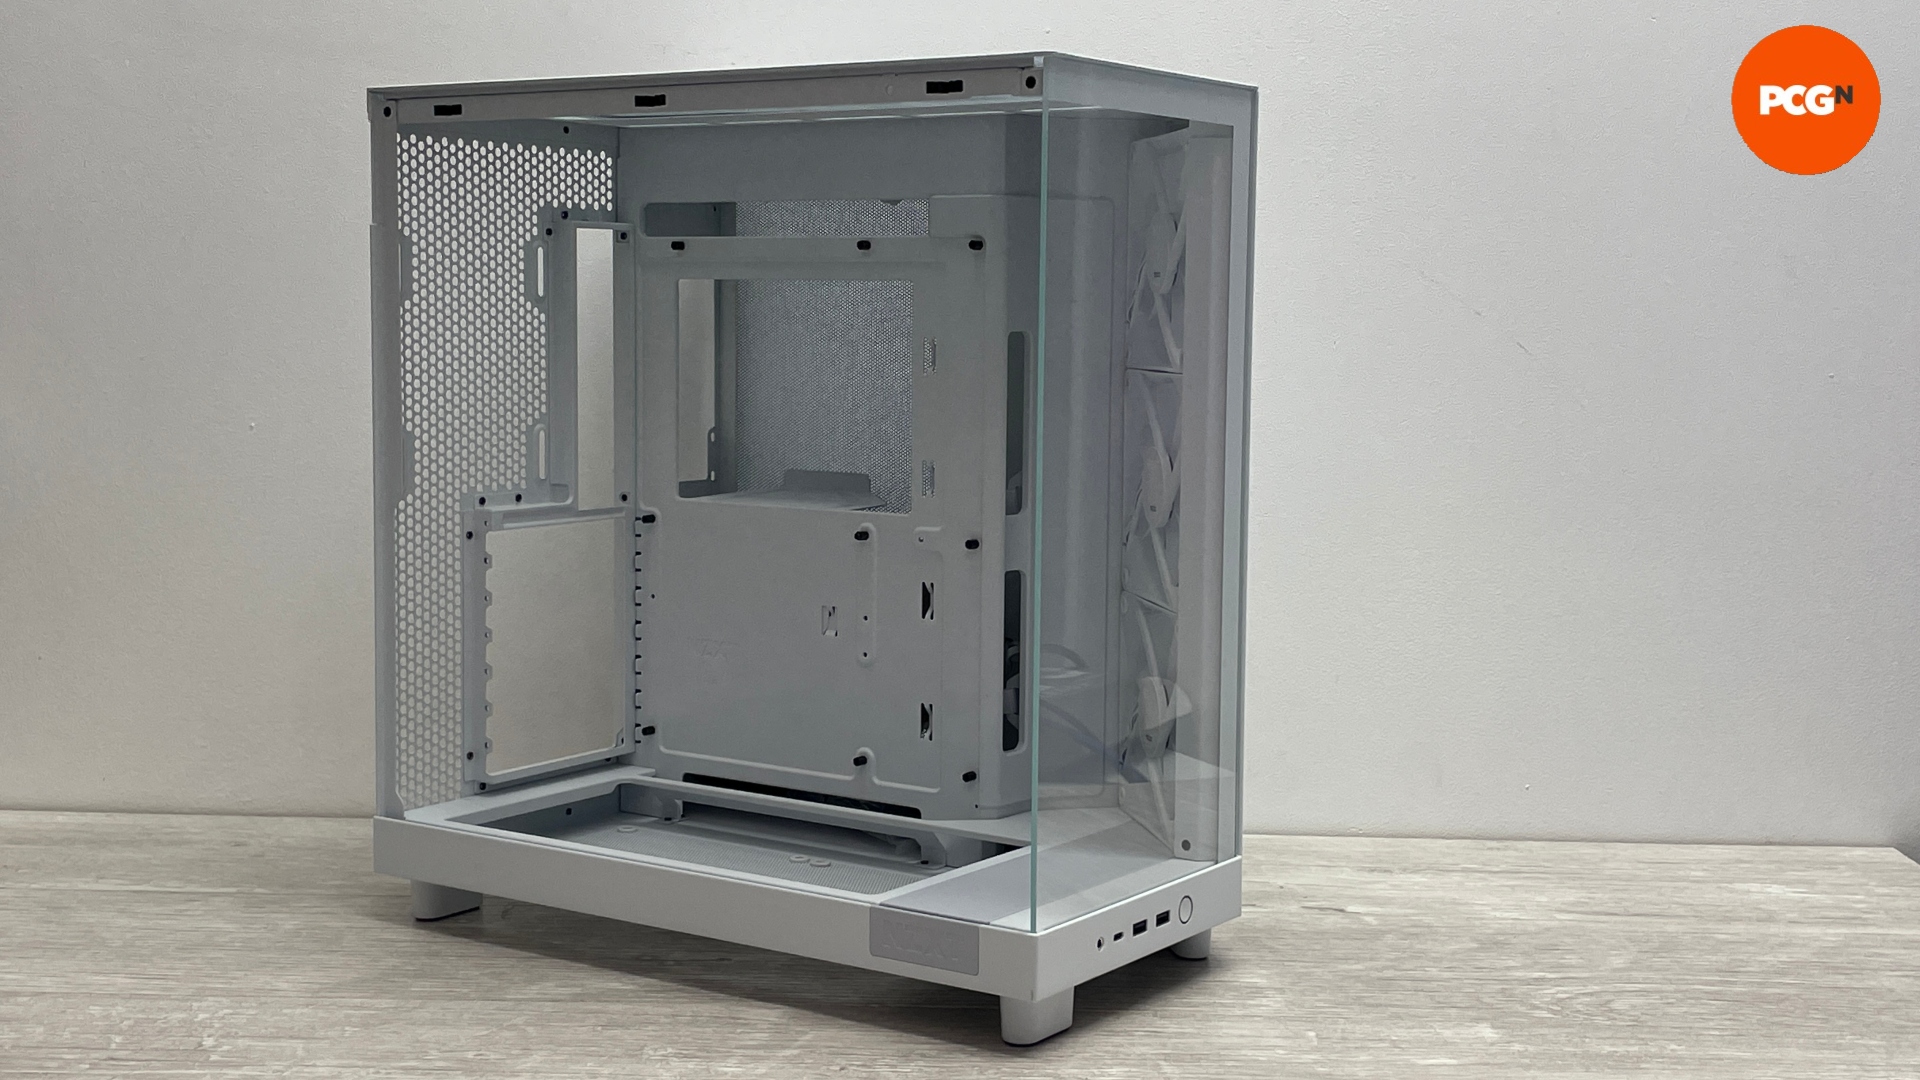 NZXT H6 Flow review image showing the case standing empty.